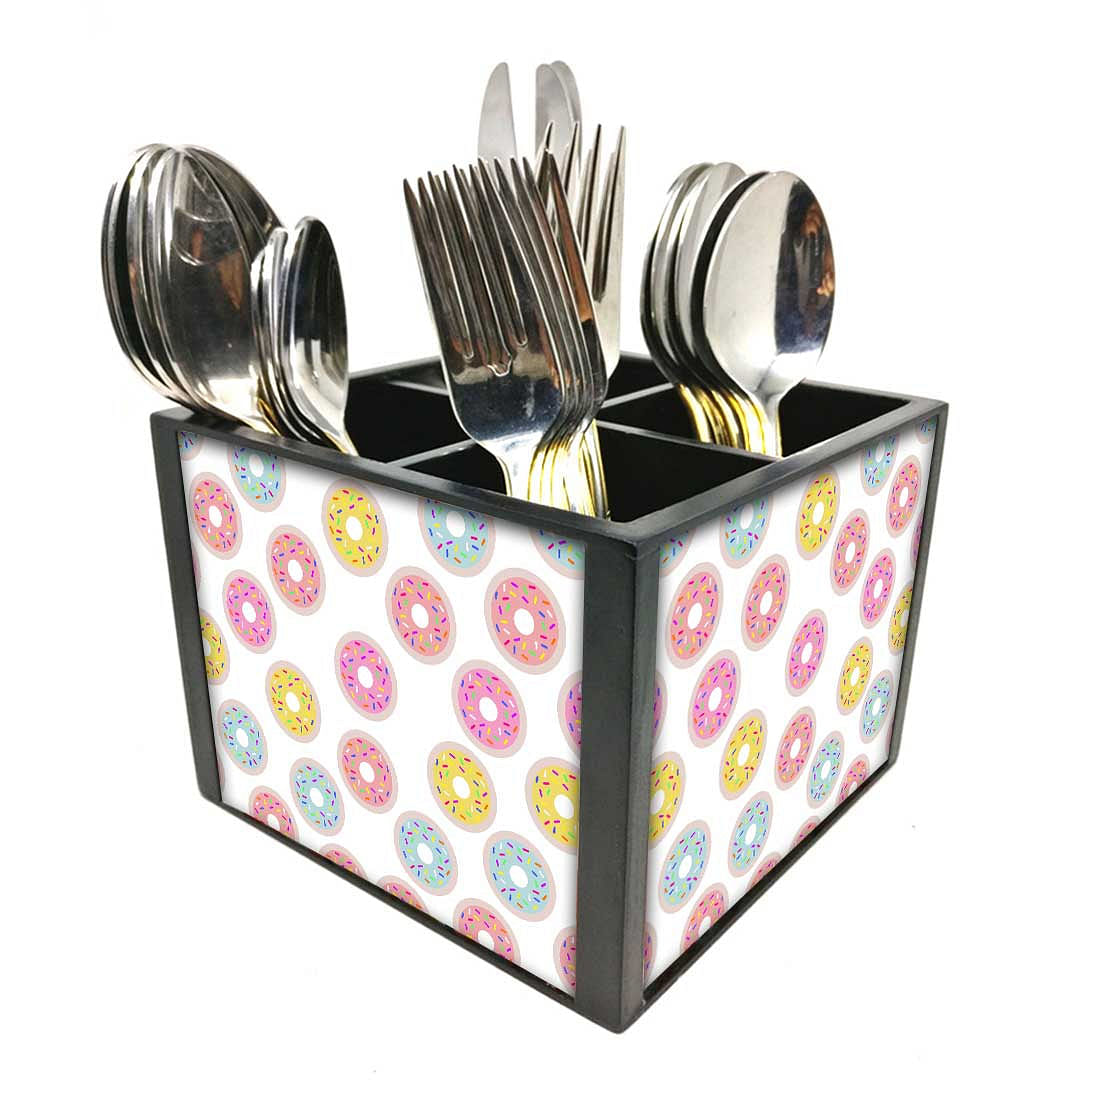 Donuts Cutlery Holder Stand Silverware Caddy Organizer for Spoons, Forks & Knives-Made of Pinewood Nutcase